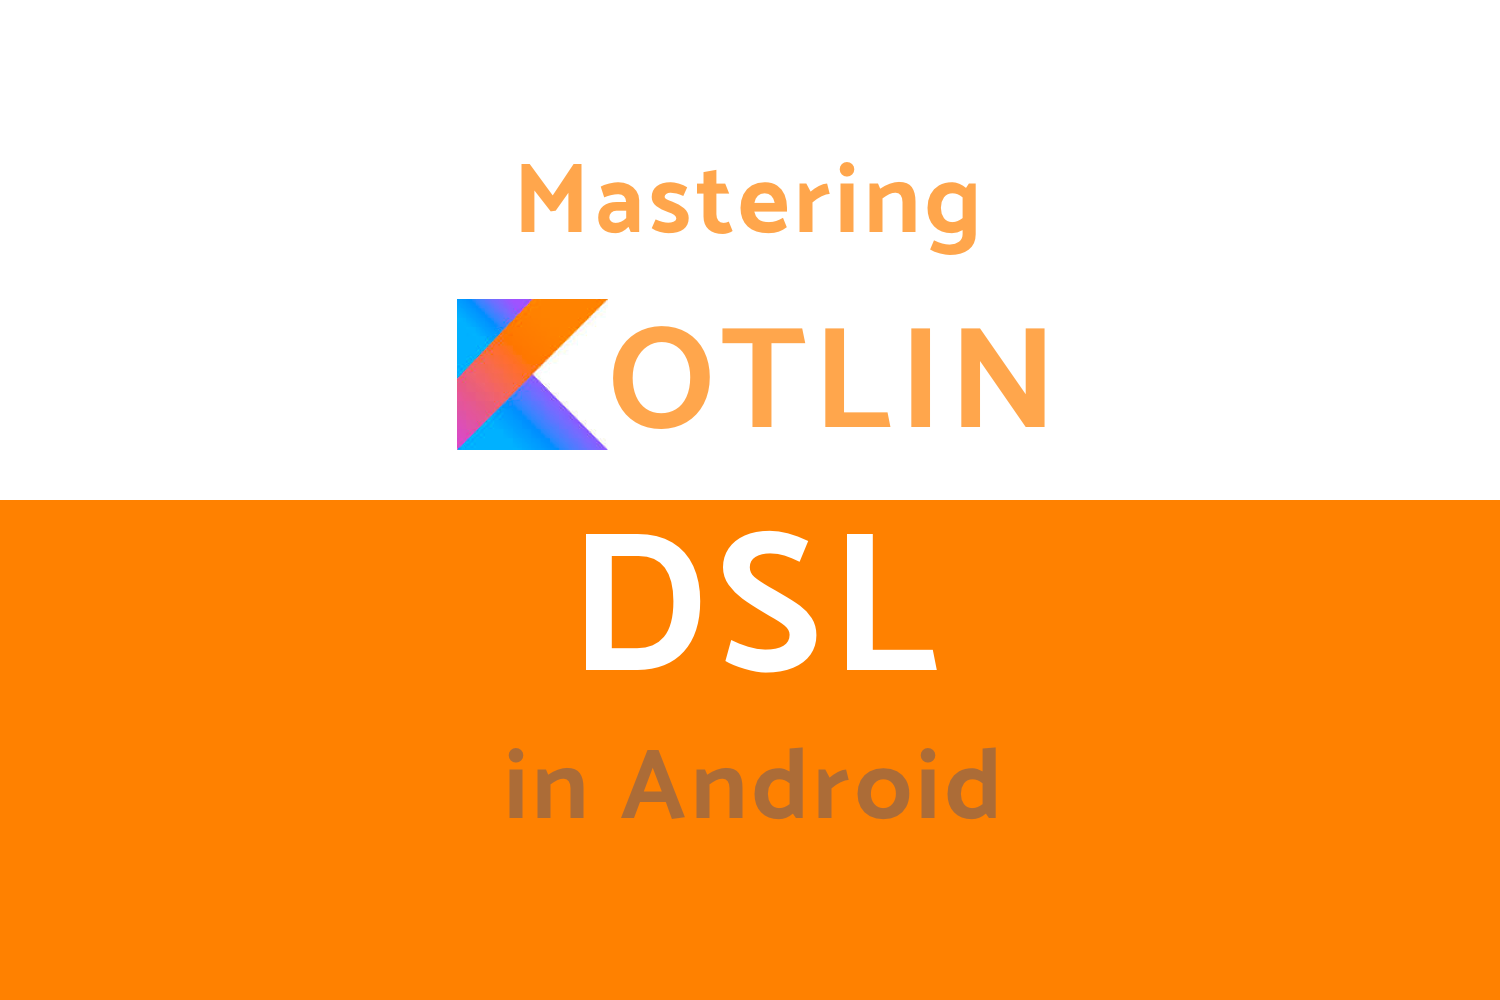 Mastering Kotlin DSL In Android - Step By Step Guide